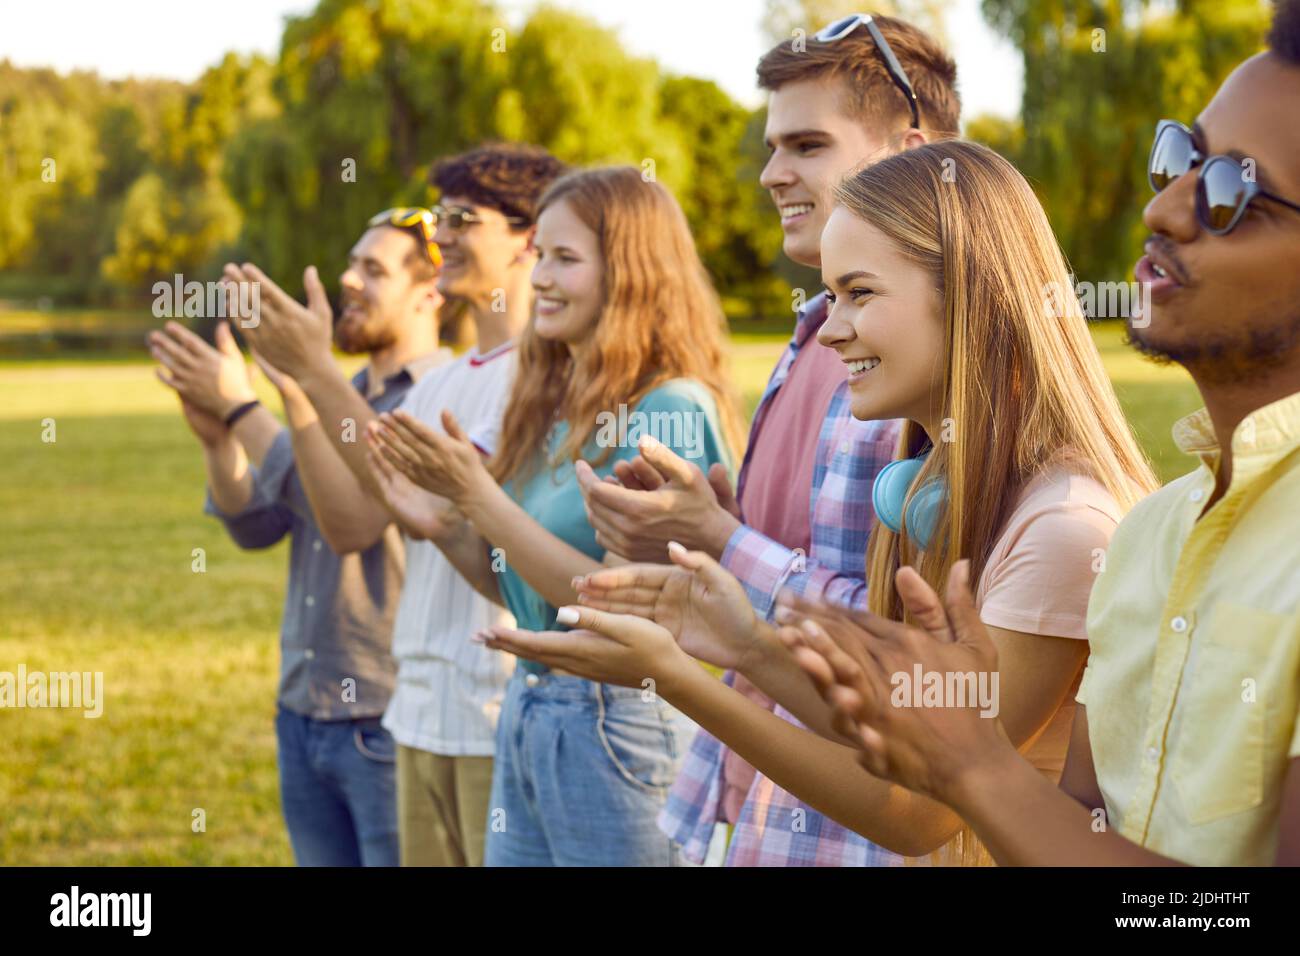 Group of joyful contented multiracial young people applaud and cheer together in park. Stock Photo